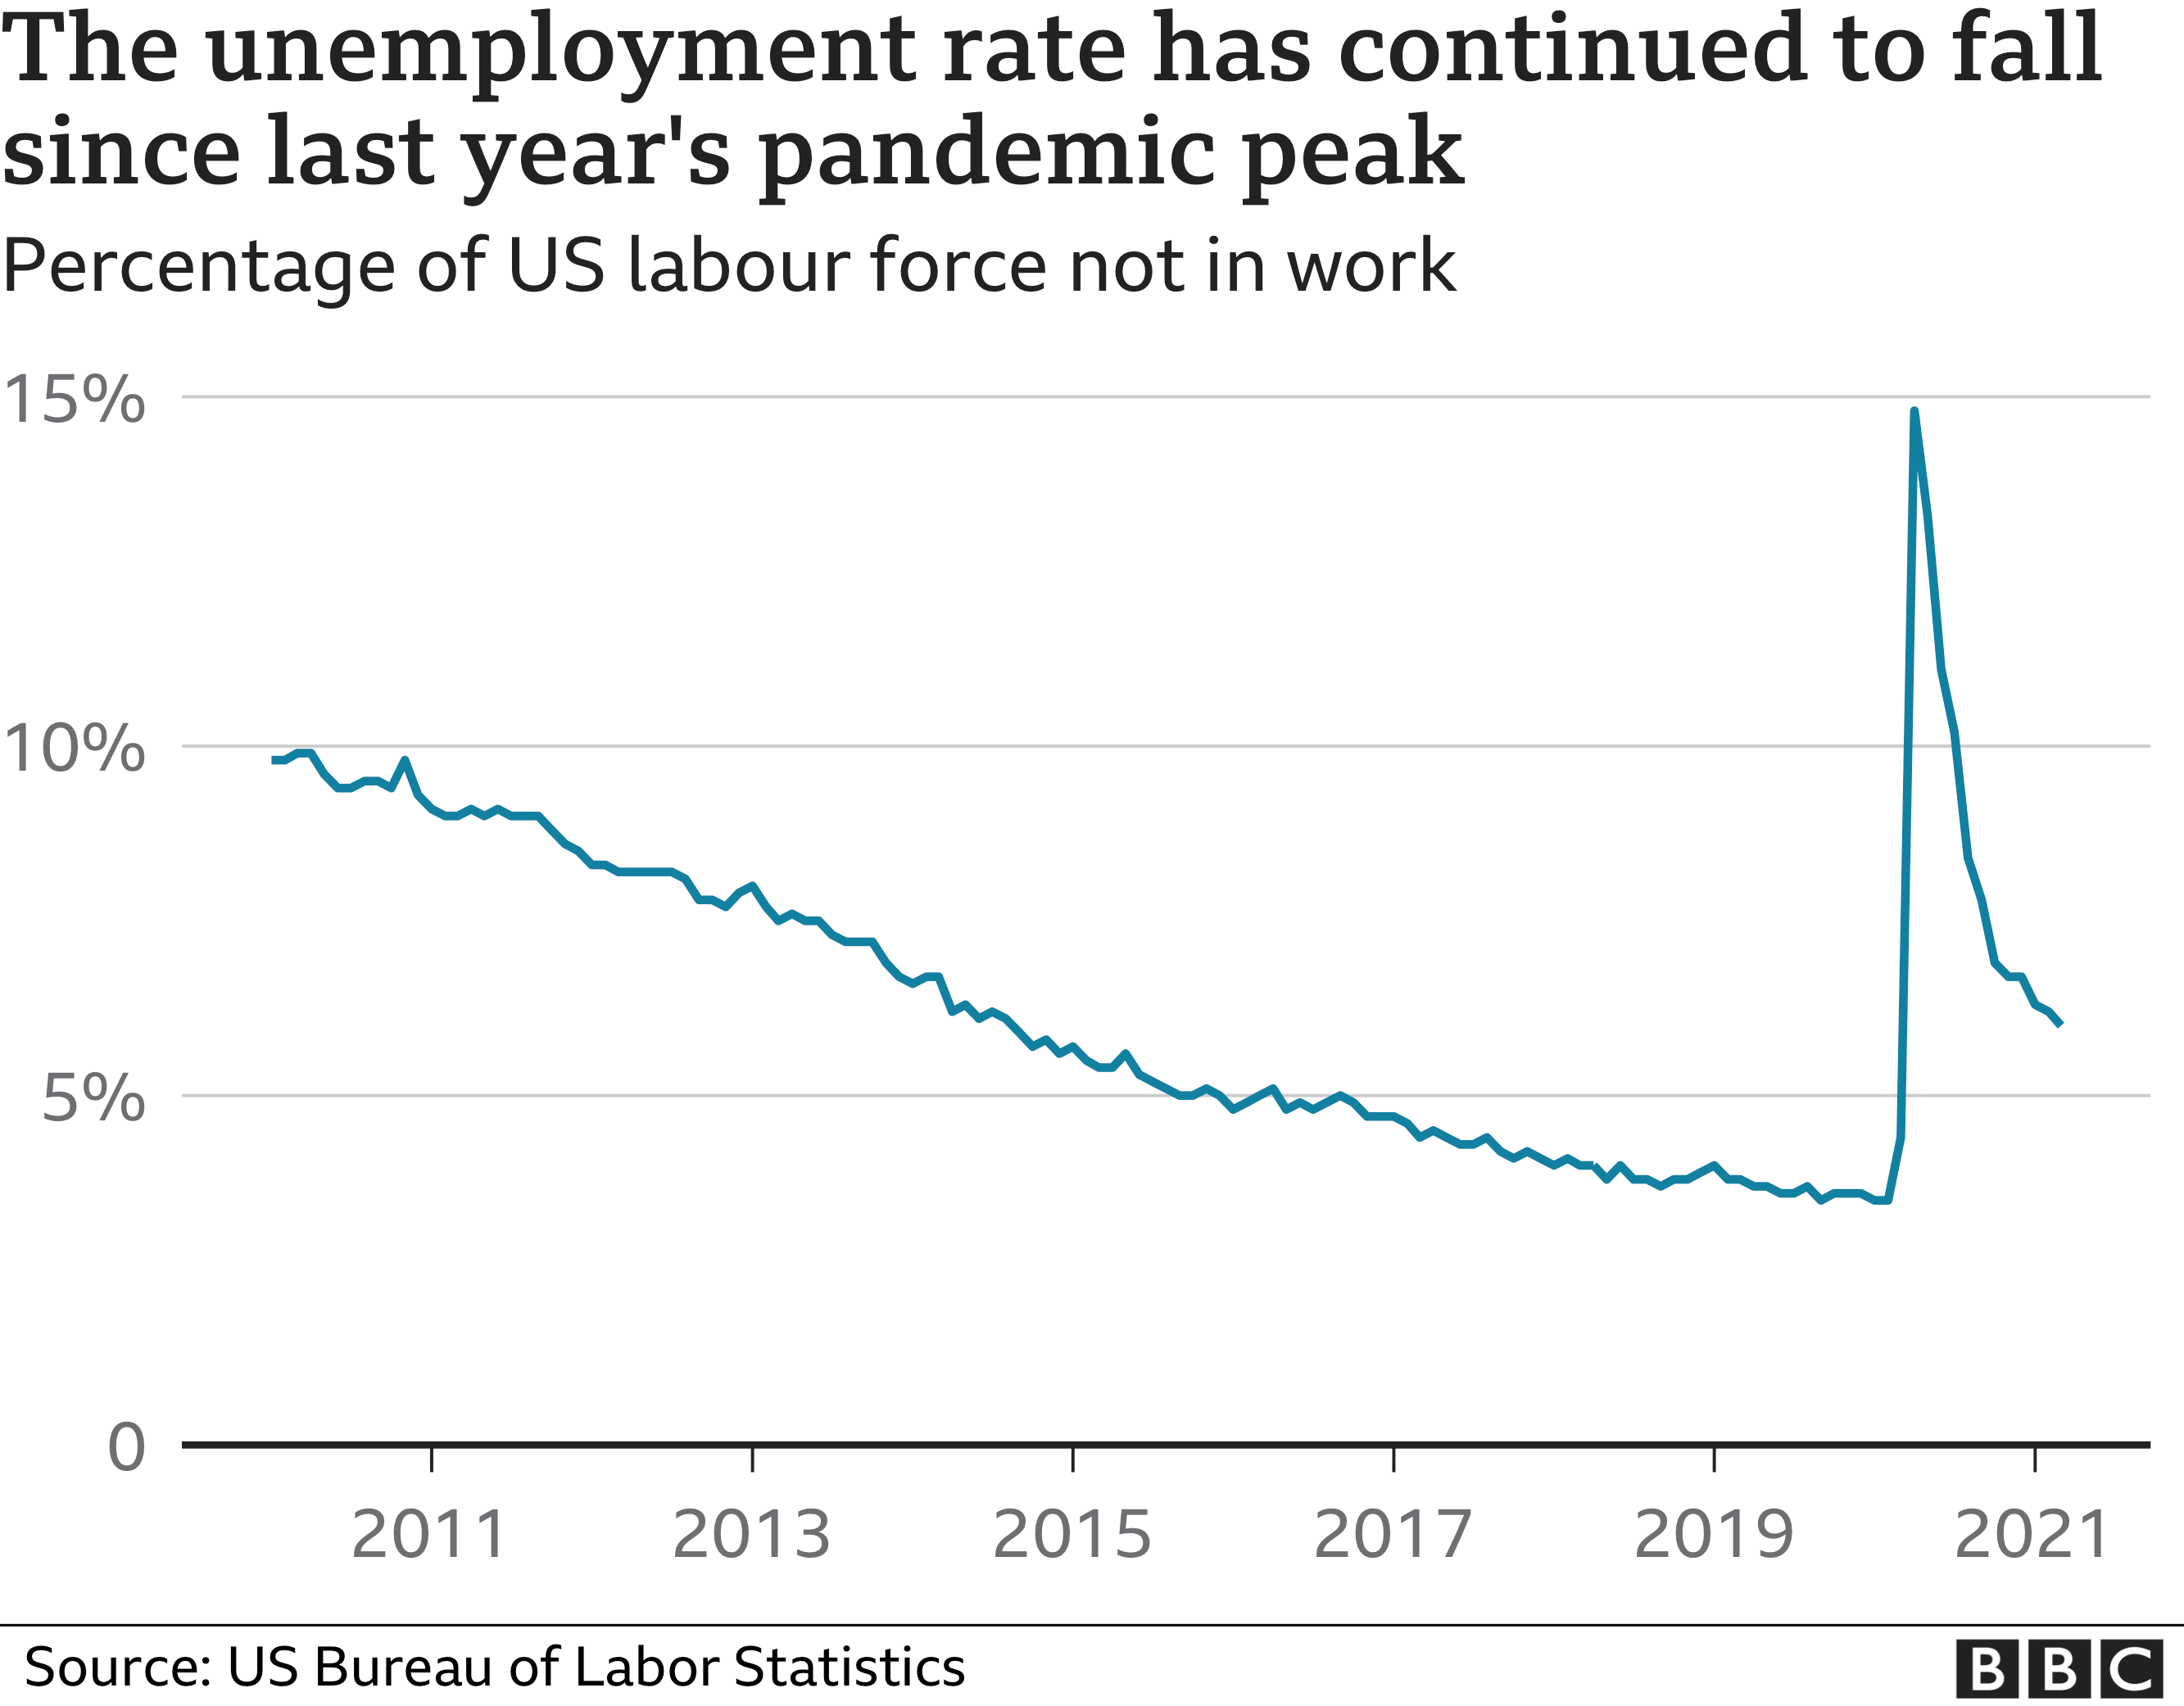 Chart showing the unemployment rate in the US